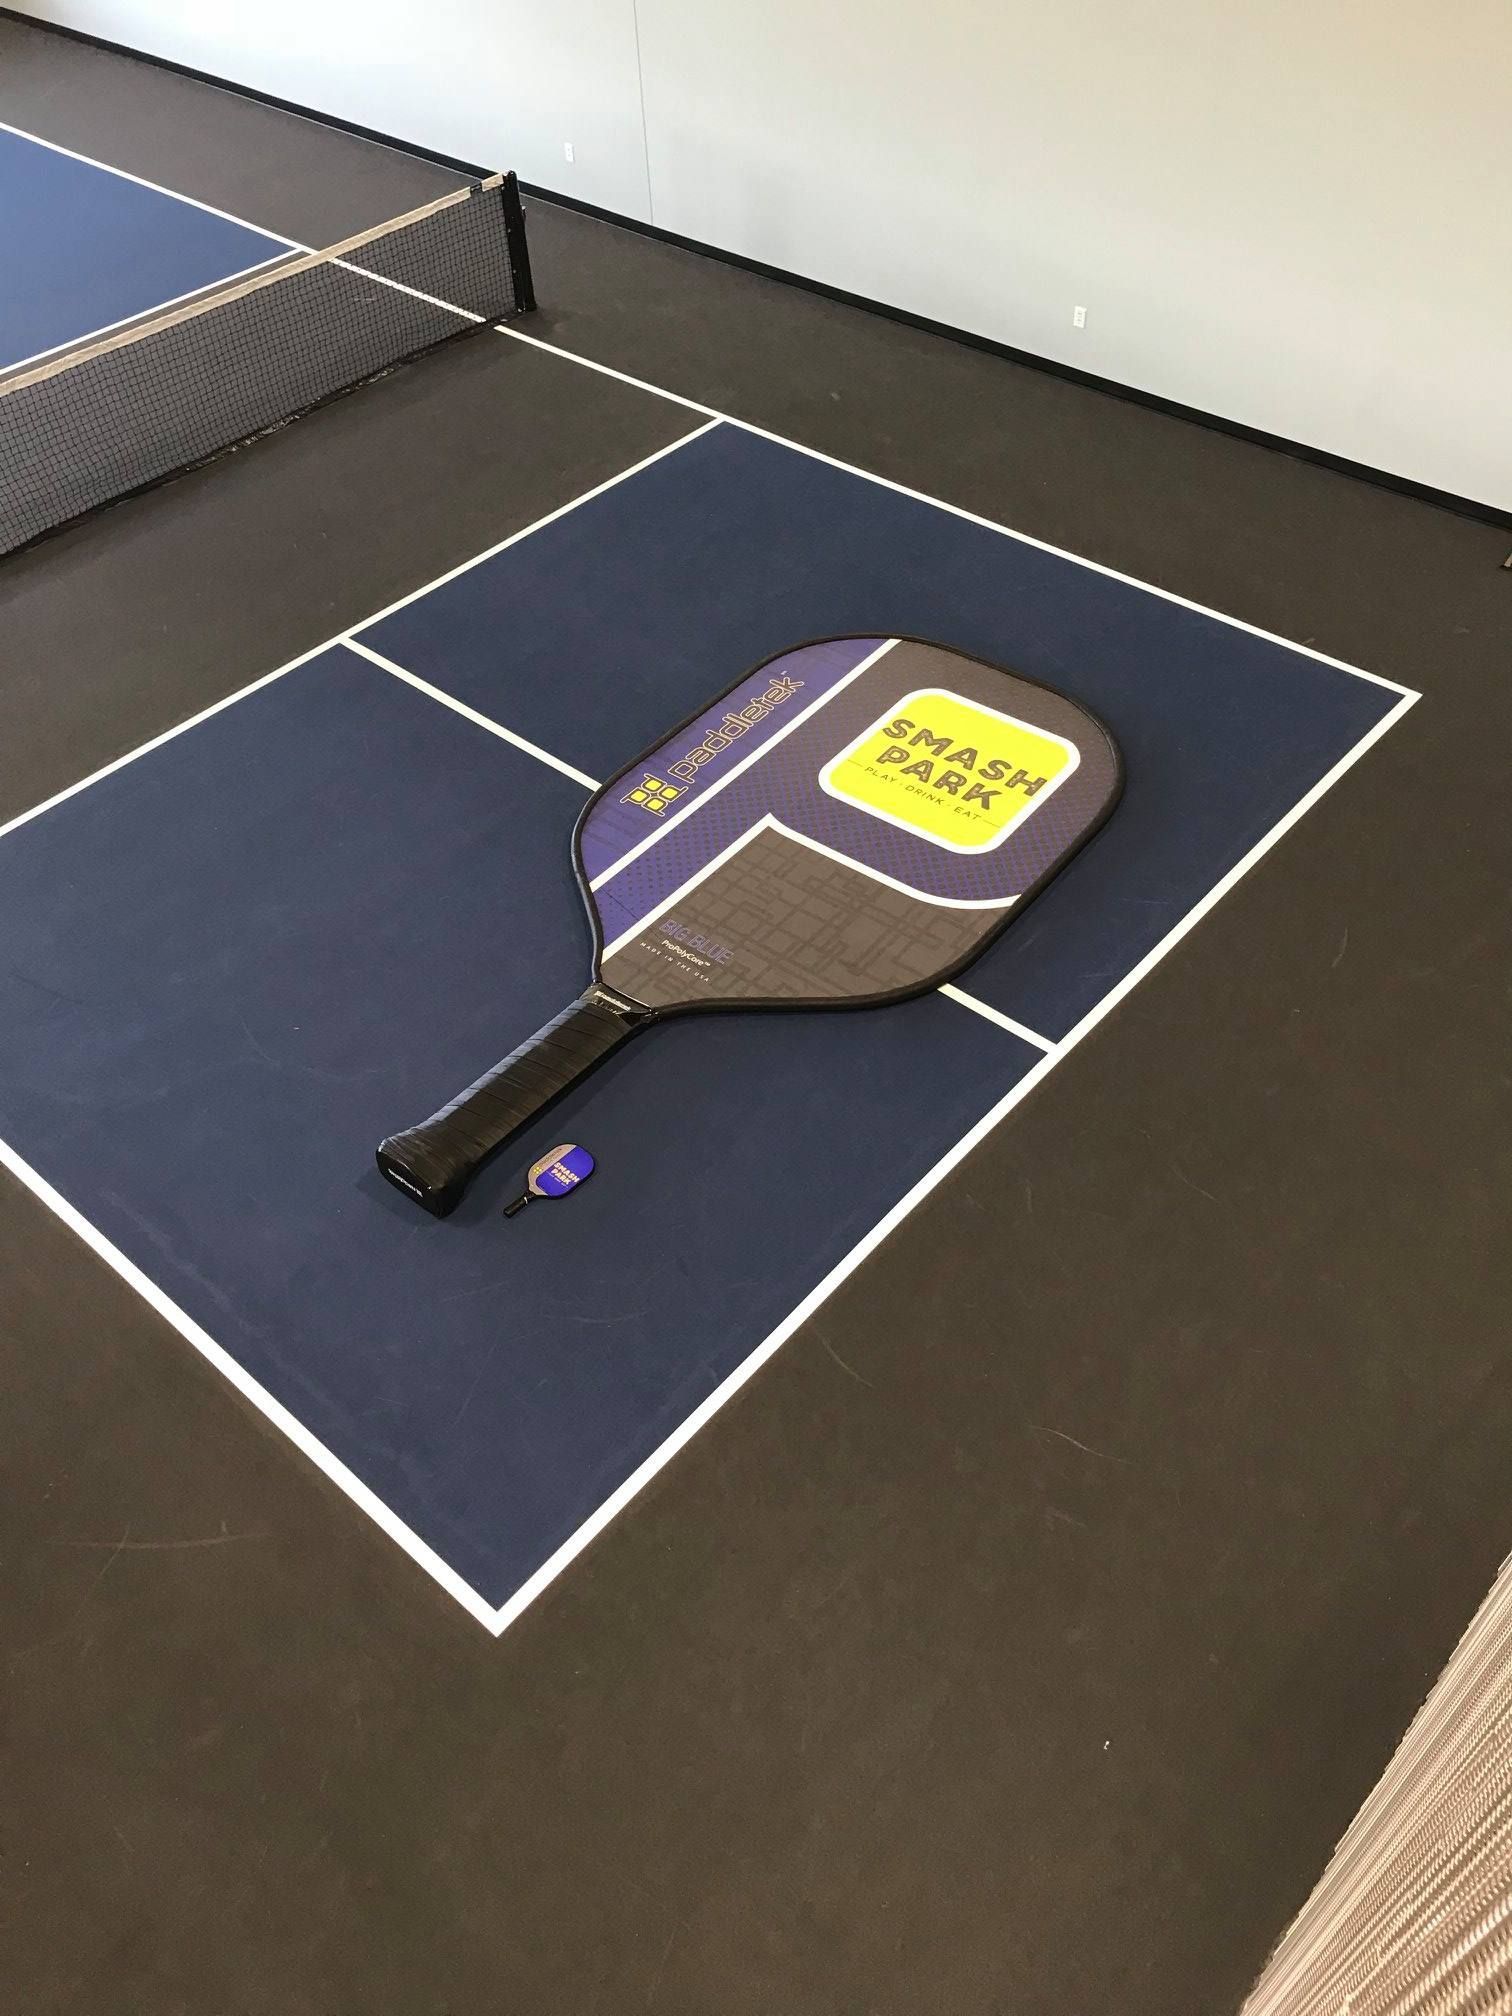 World’s Largest Pickleball Paddle: world record in West Des Moines, Iowa